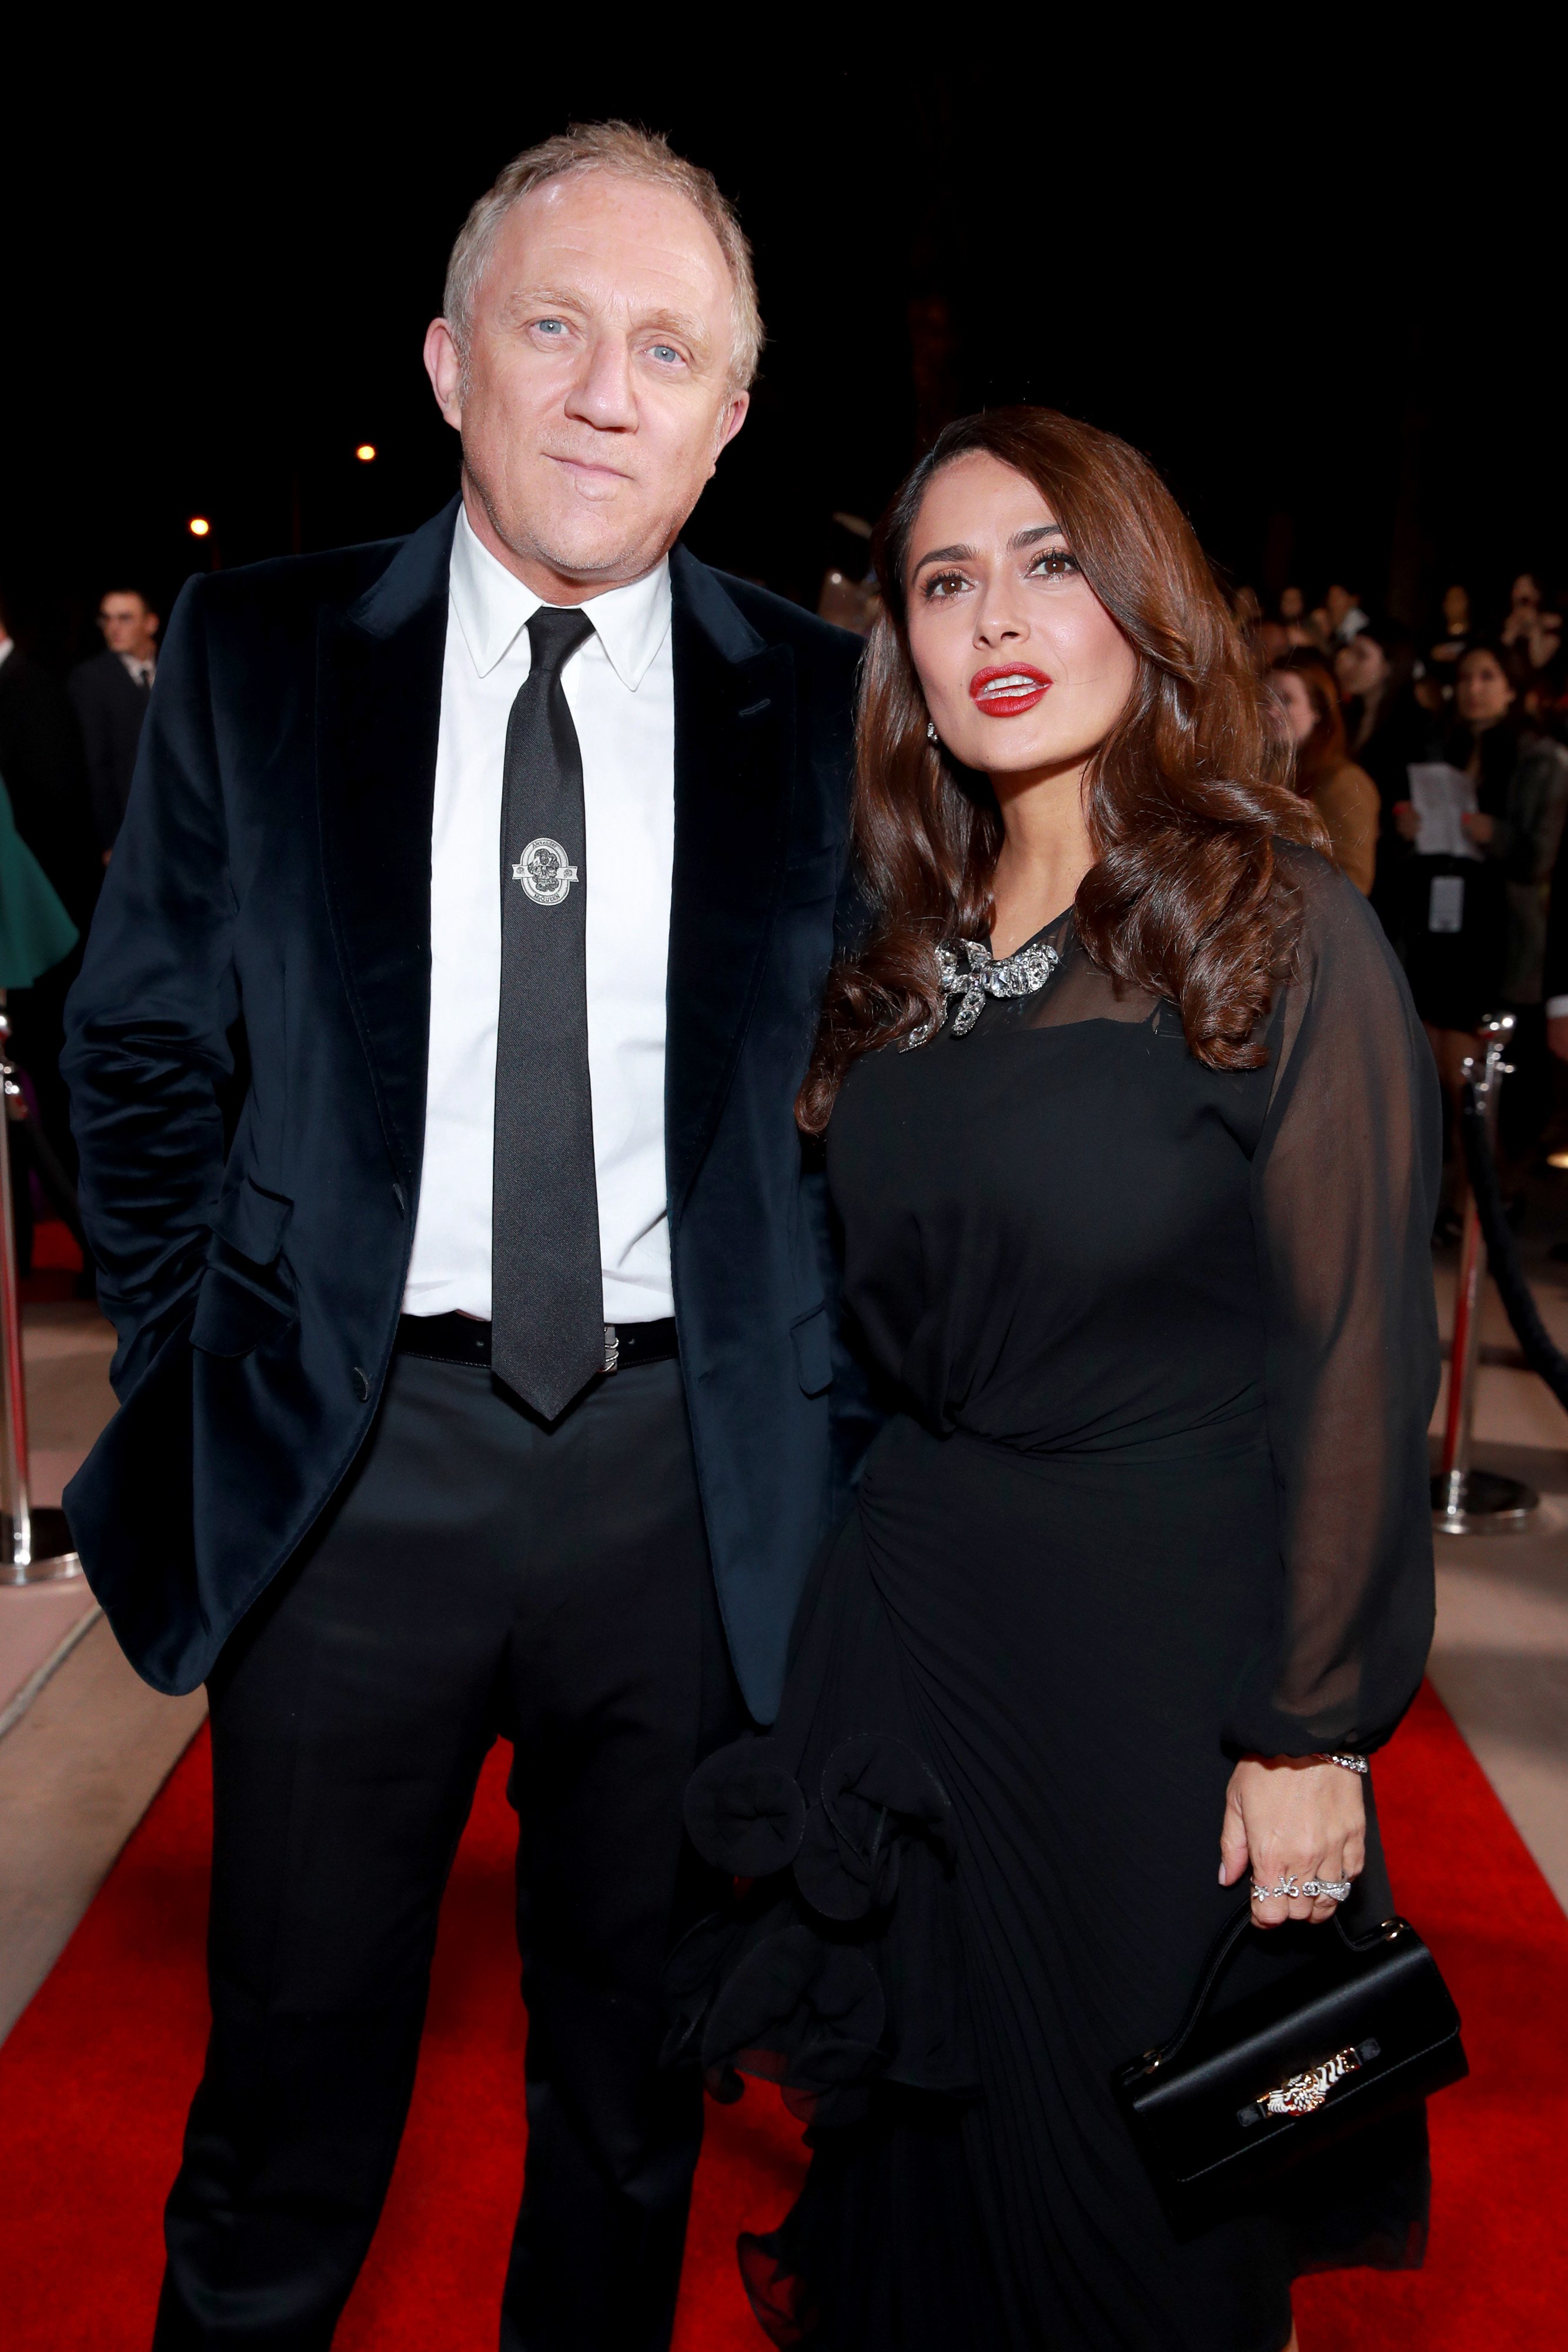 François-Henri Pinault and Salma Hayek at the 31st Annual Palm Springs International Film Festival Film Awards Gala on January 02, 2020. | Photo: Getty Images